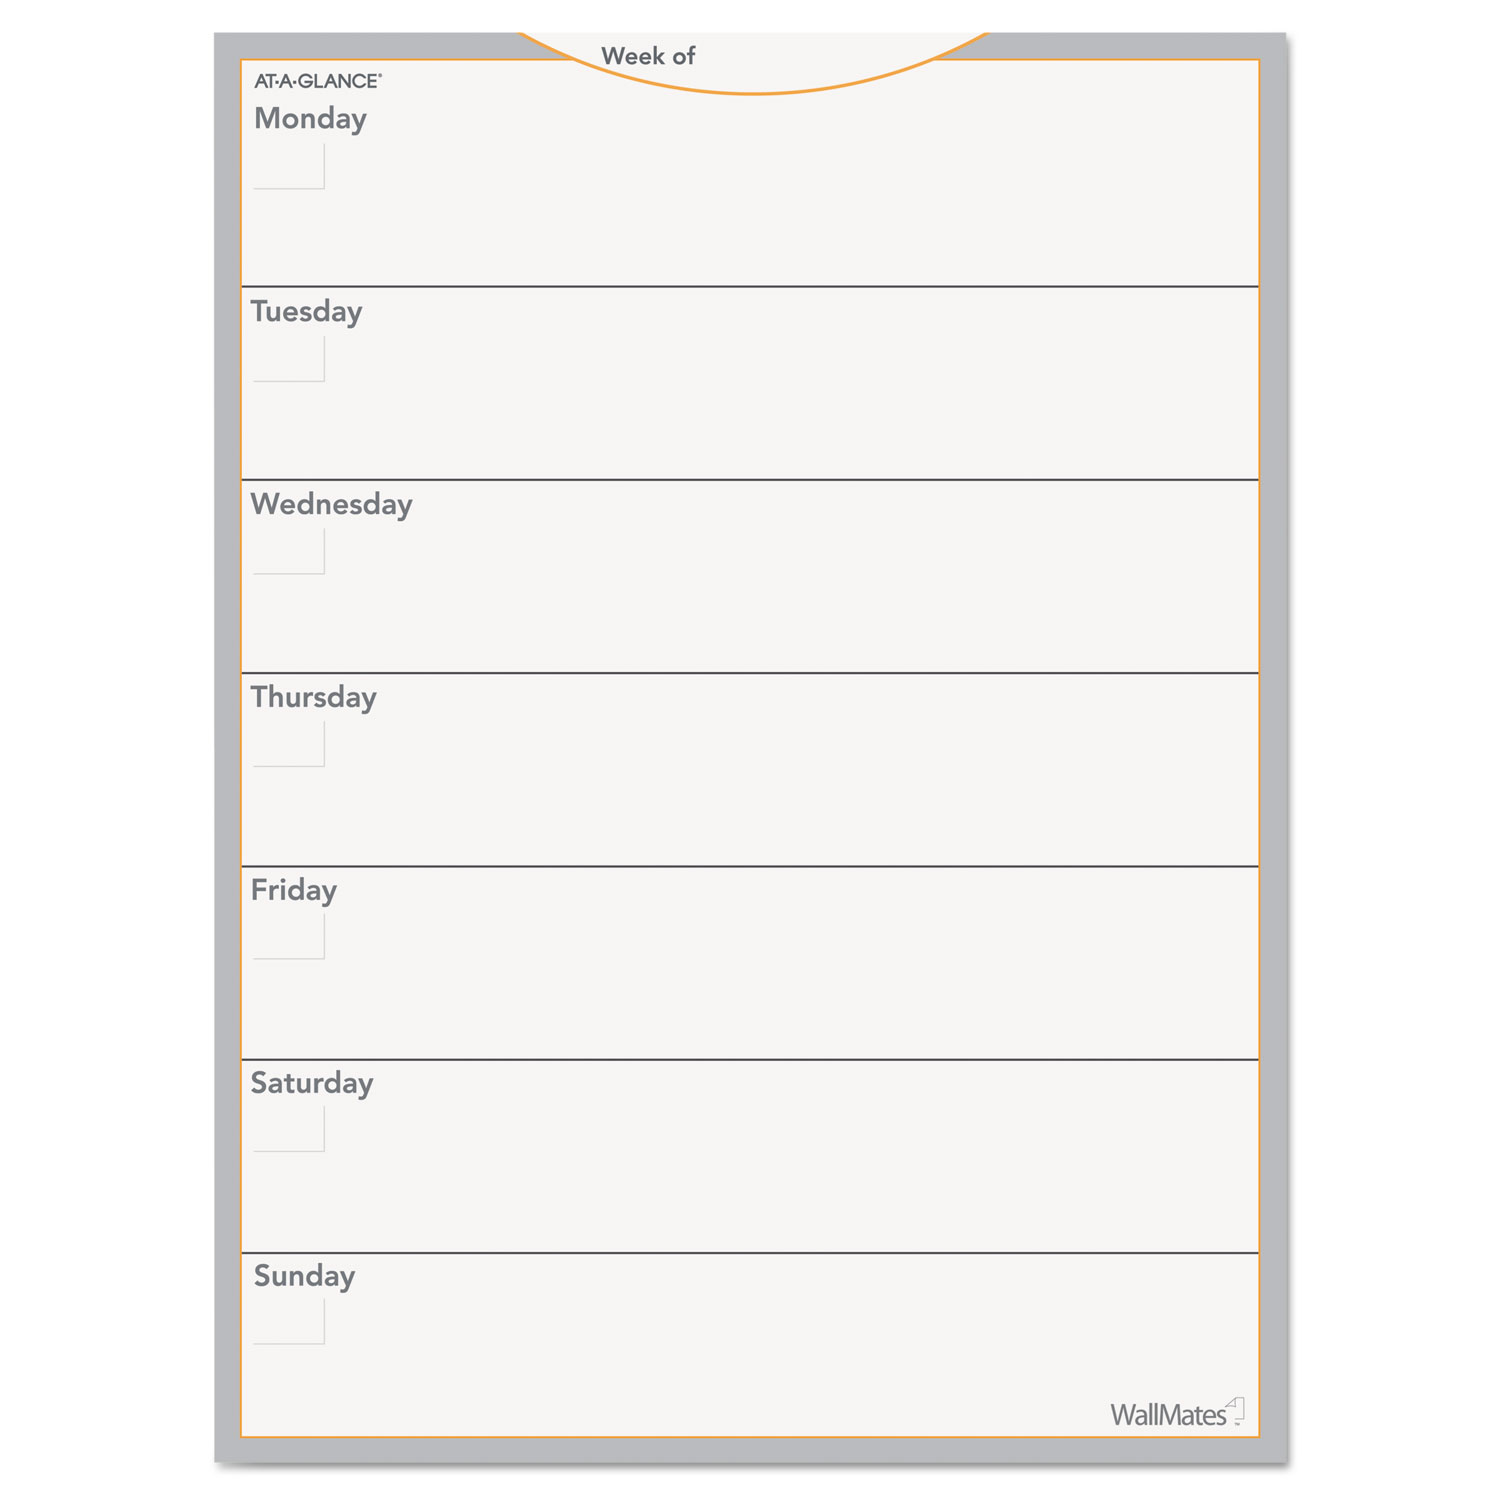  AT-A-GLANCE AW503028 WallMates Self-Adhesive Dry Erase Weekly Planning Surface, 18 x 24 (AAGAW503028) 